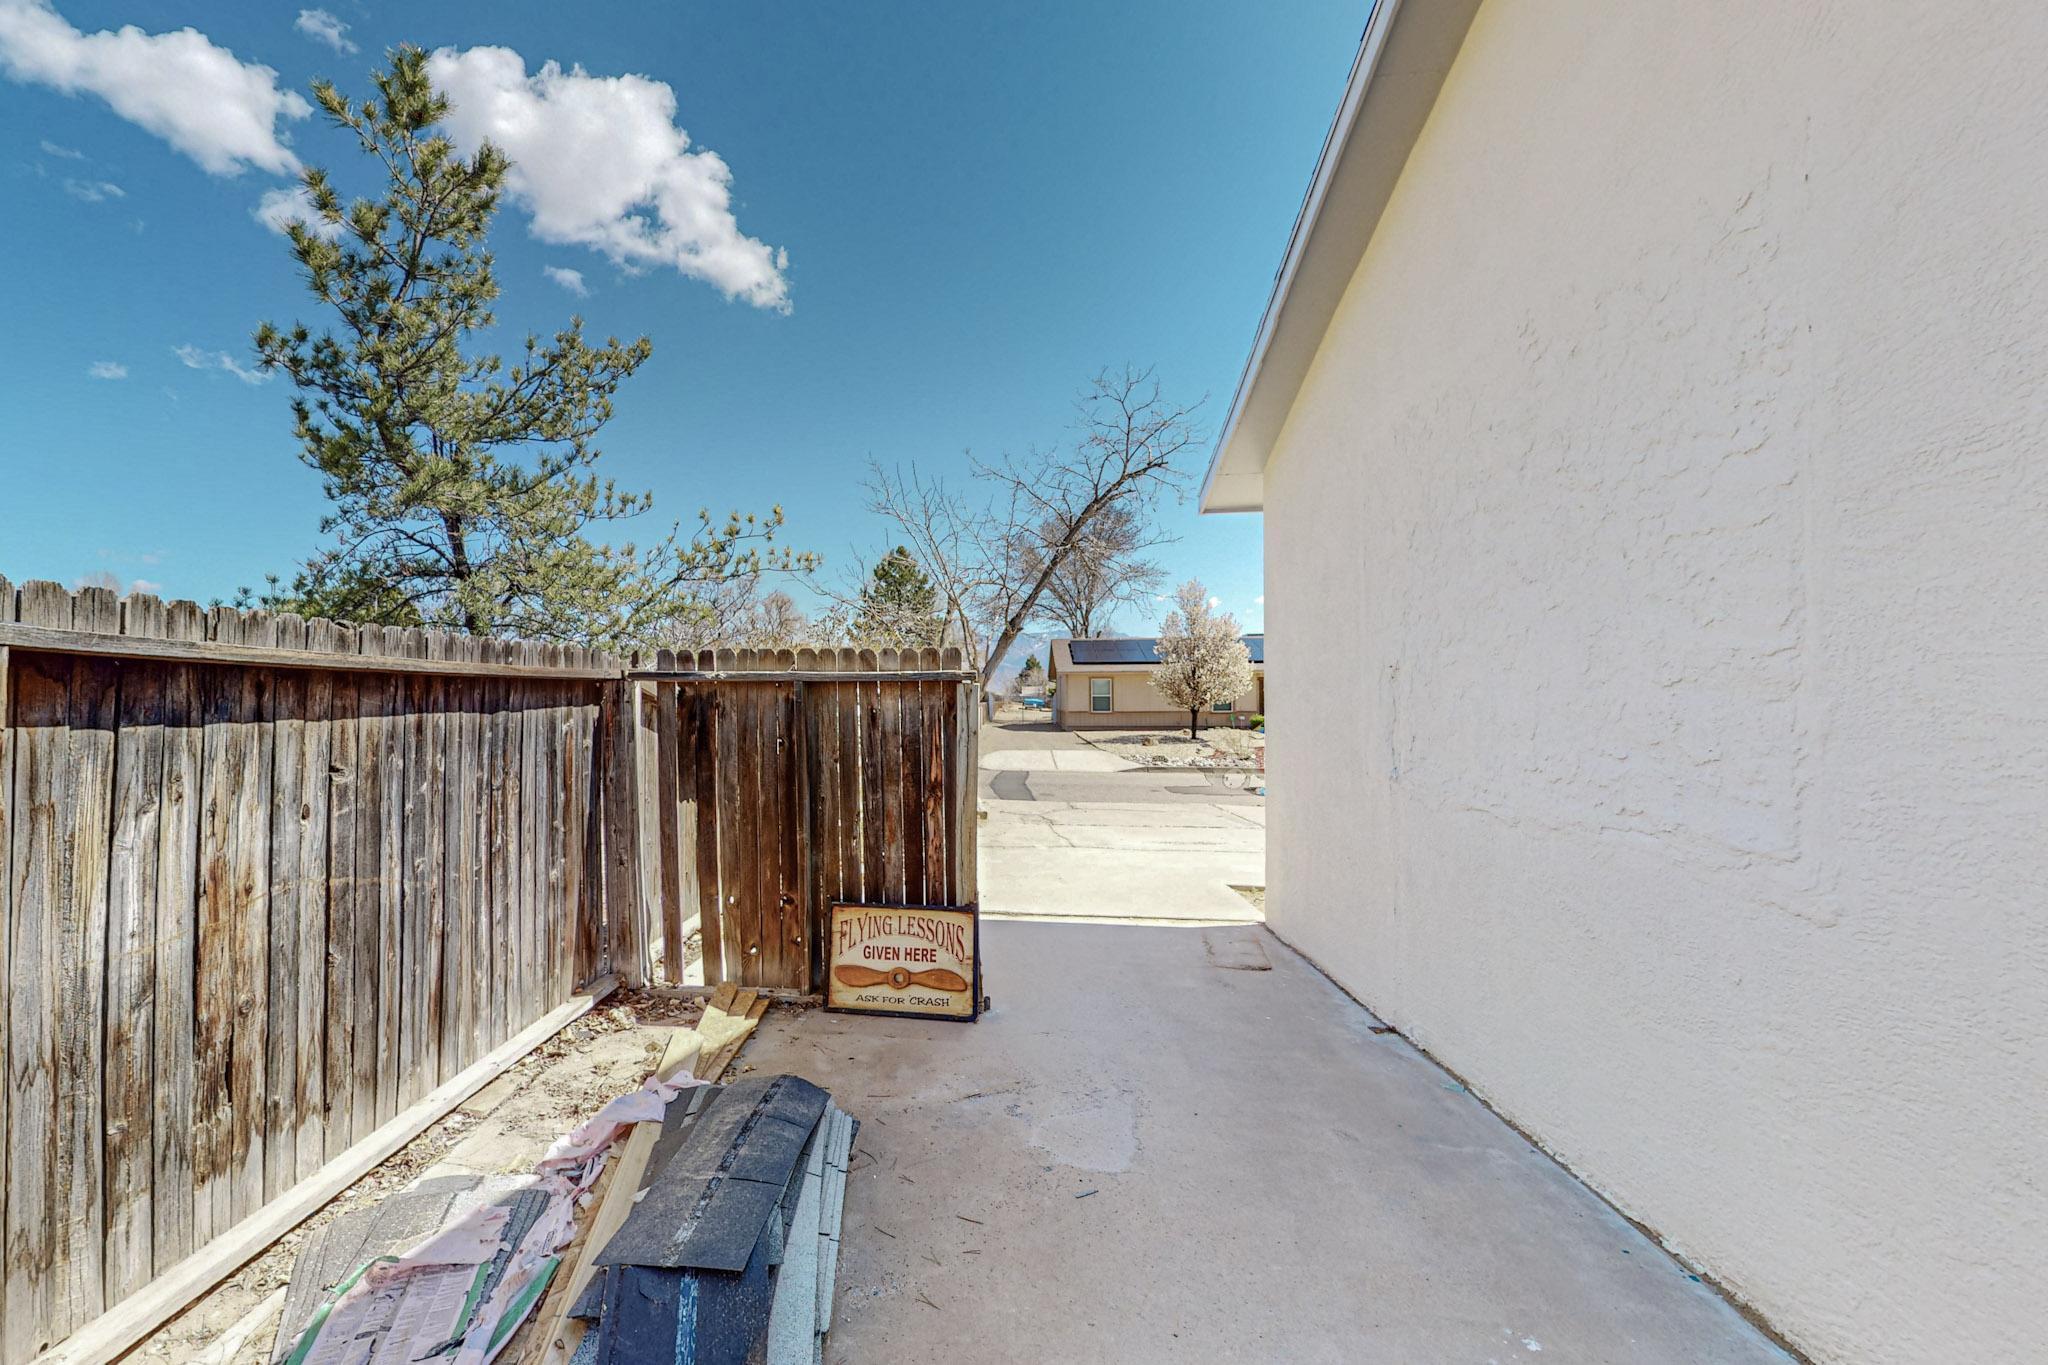 1721 32nd Street SE, Rio Rancho, New Mexico 87124, 3 Bedrooms Bedrooms, ,2 BathroomsBathrooms,Residential,For Sale,1721 32nd Street SE,1059383